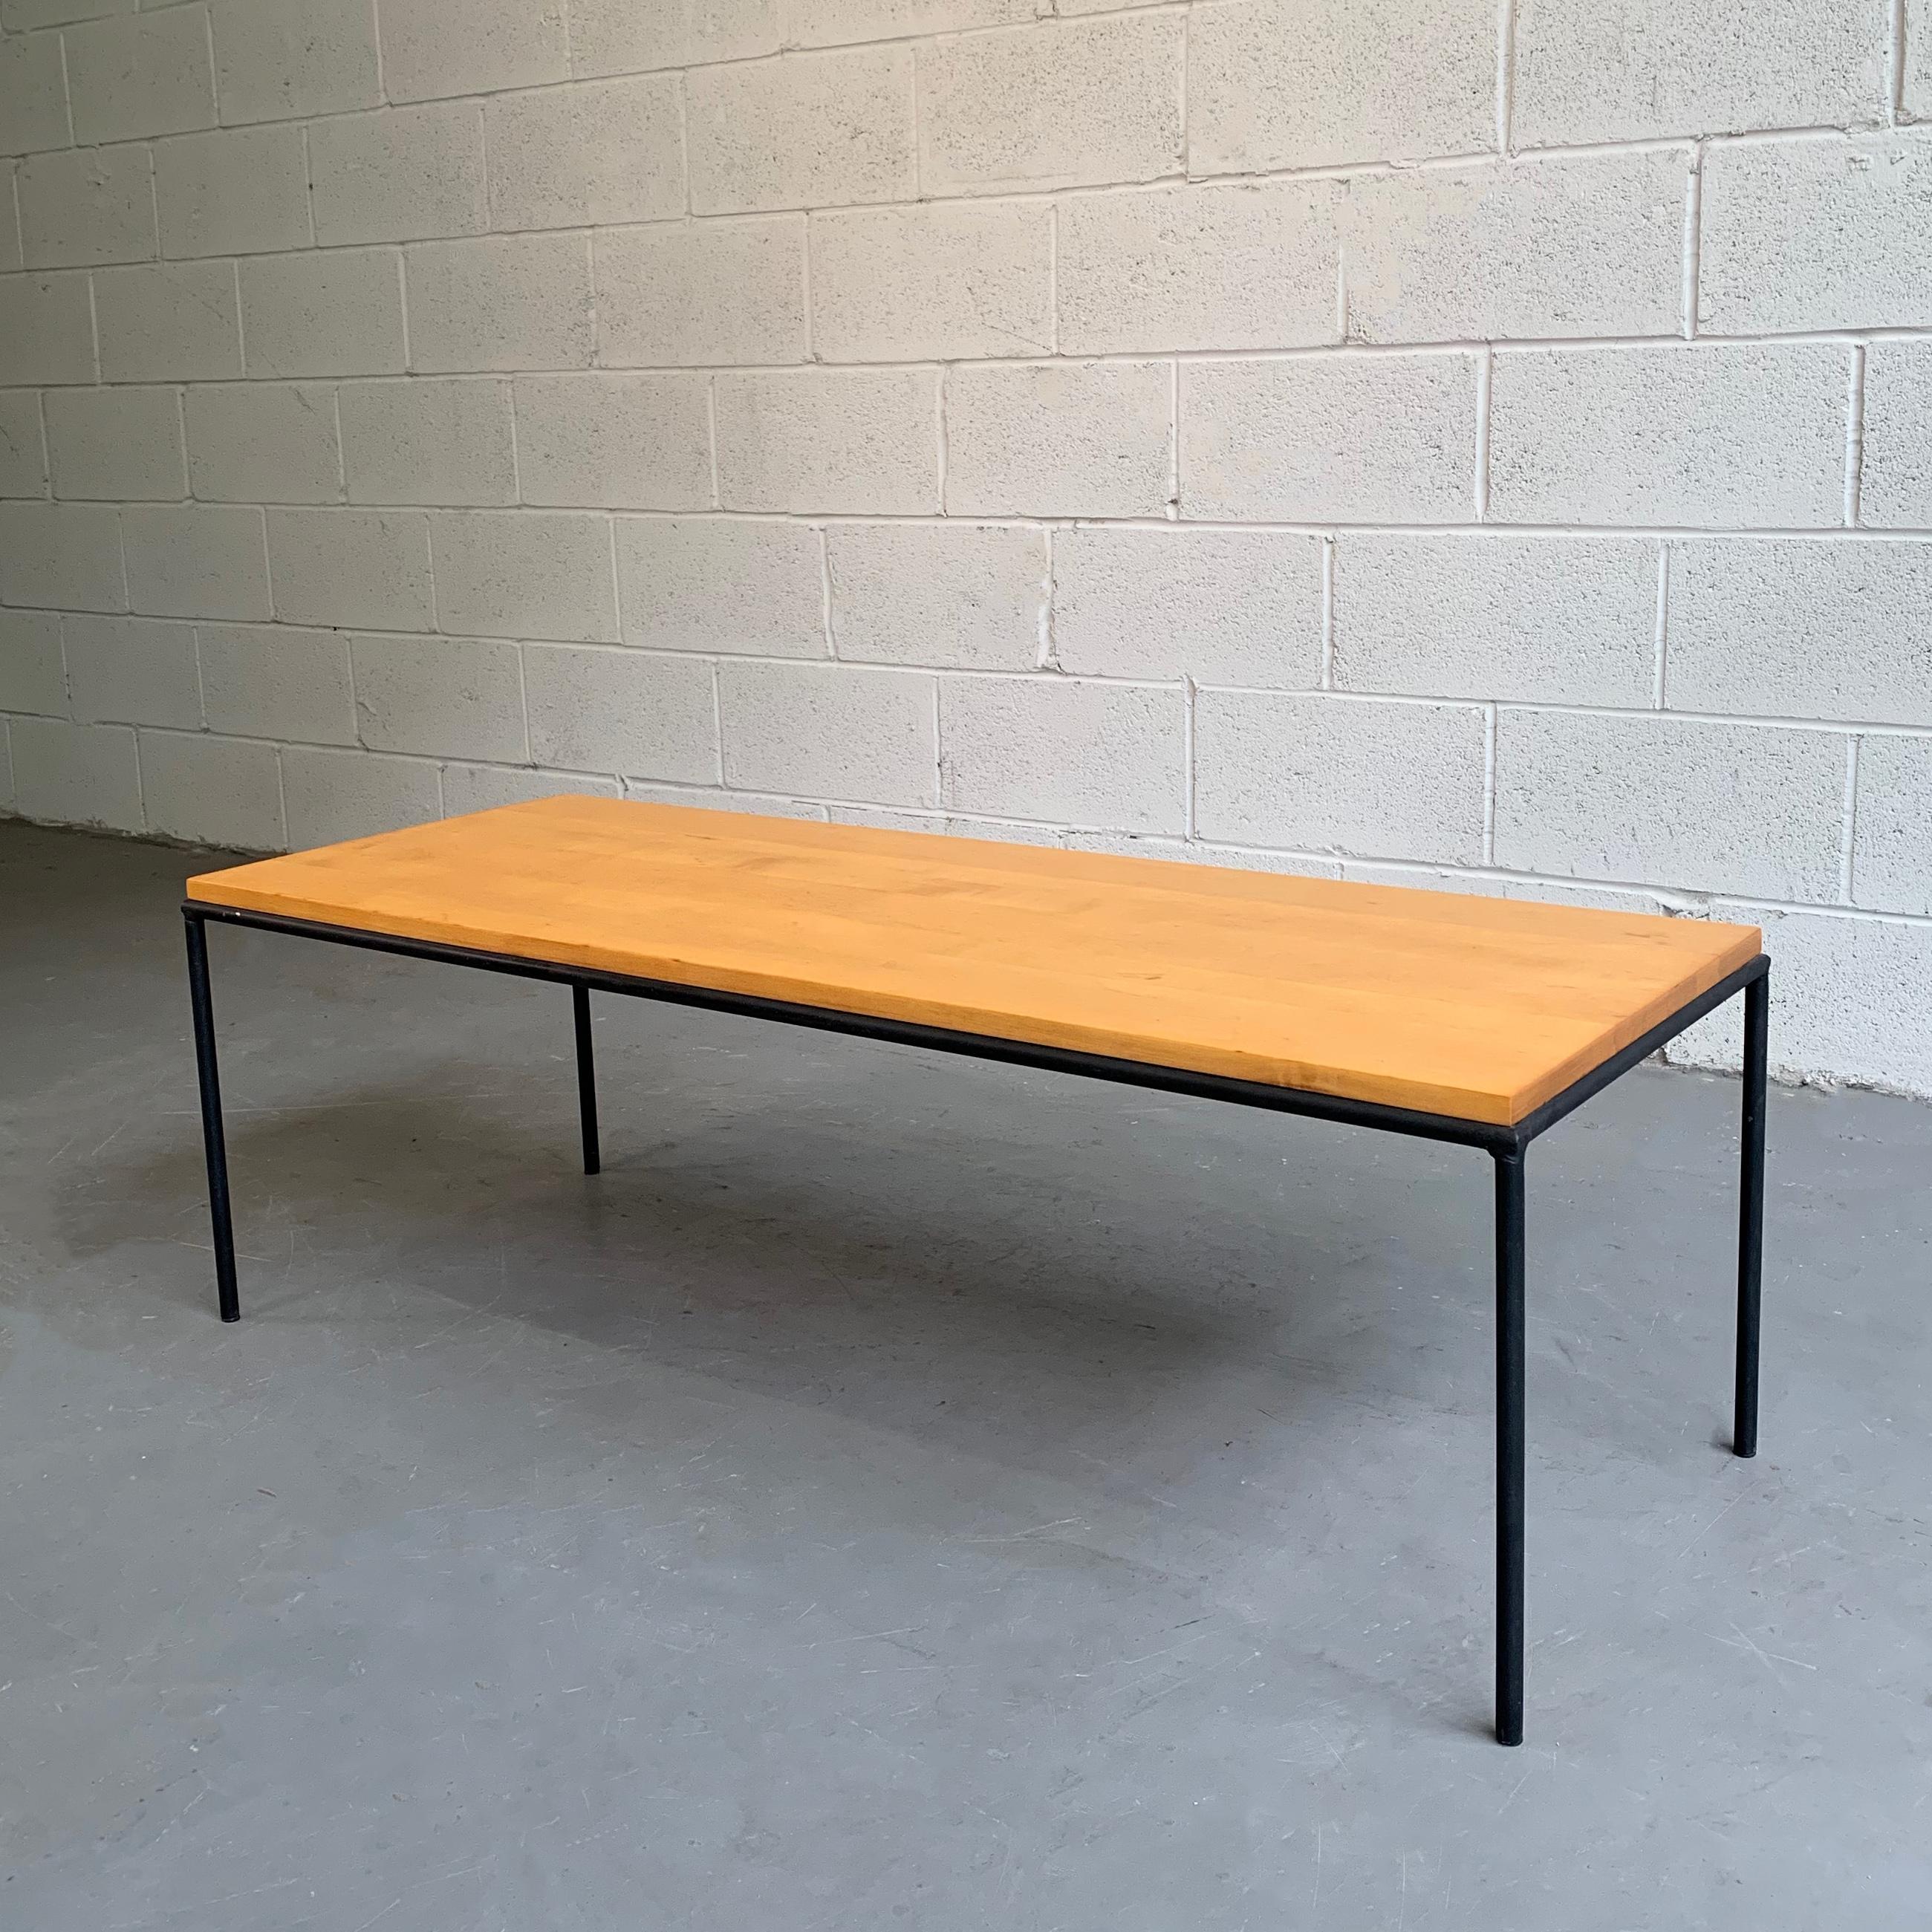 Mid-Century Modern, coffee table by Paul McCobb for Winchendon features a minimal wrought iron frame with maple top.